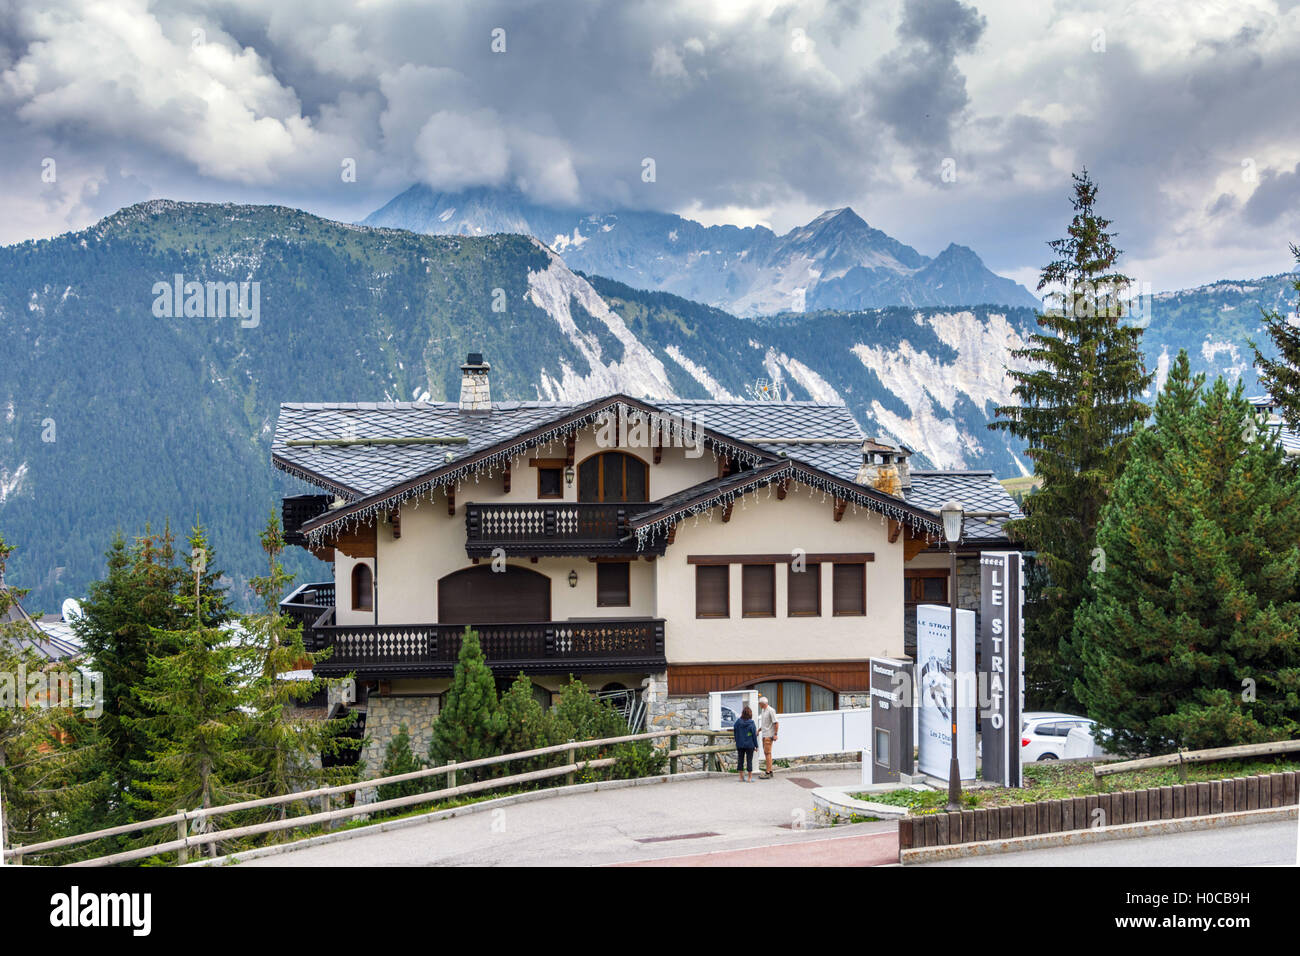 High-End-teures Hotel in Courcheval 1850 Skigebiet im Sommer Stockfoto